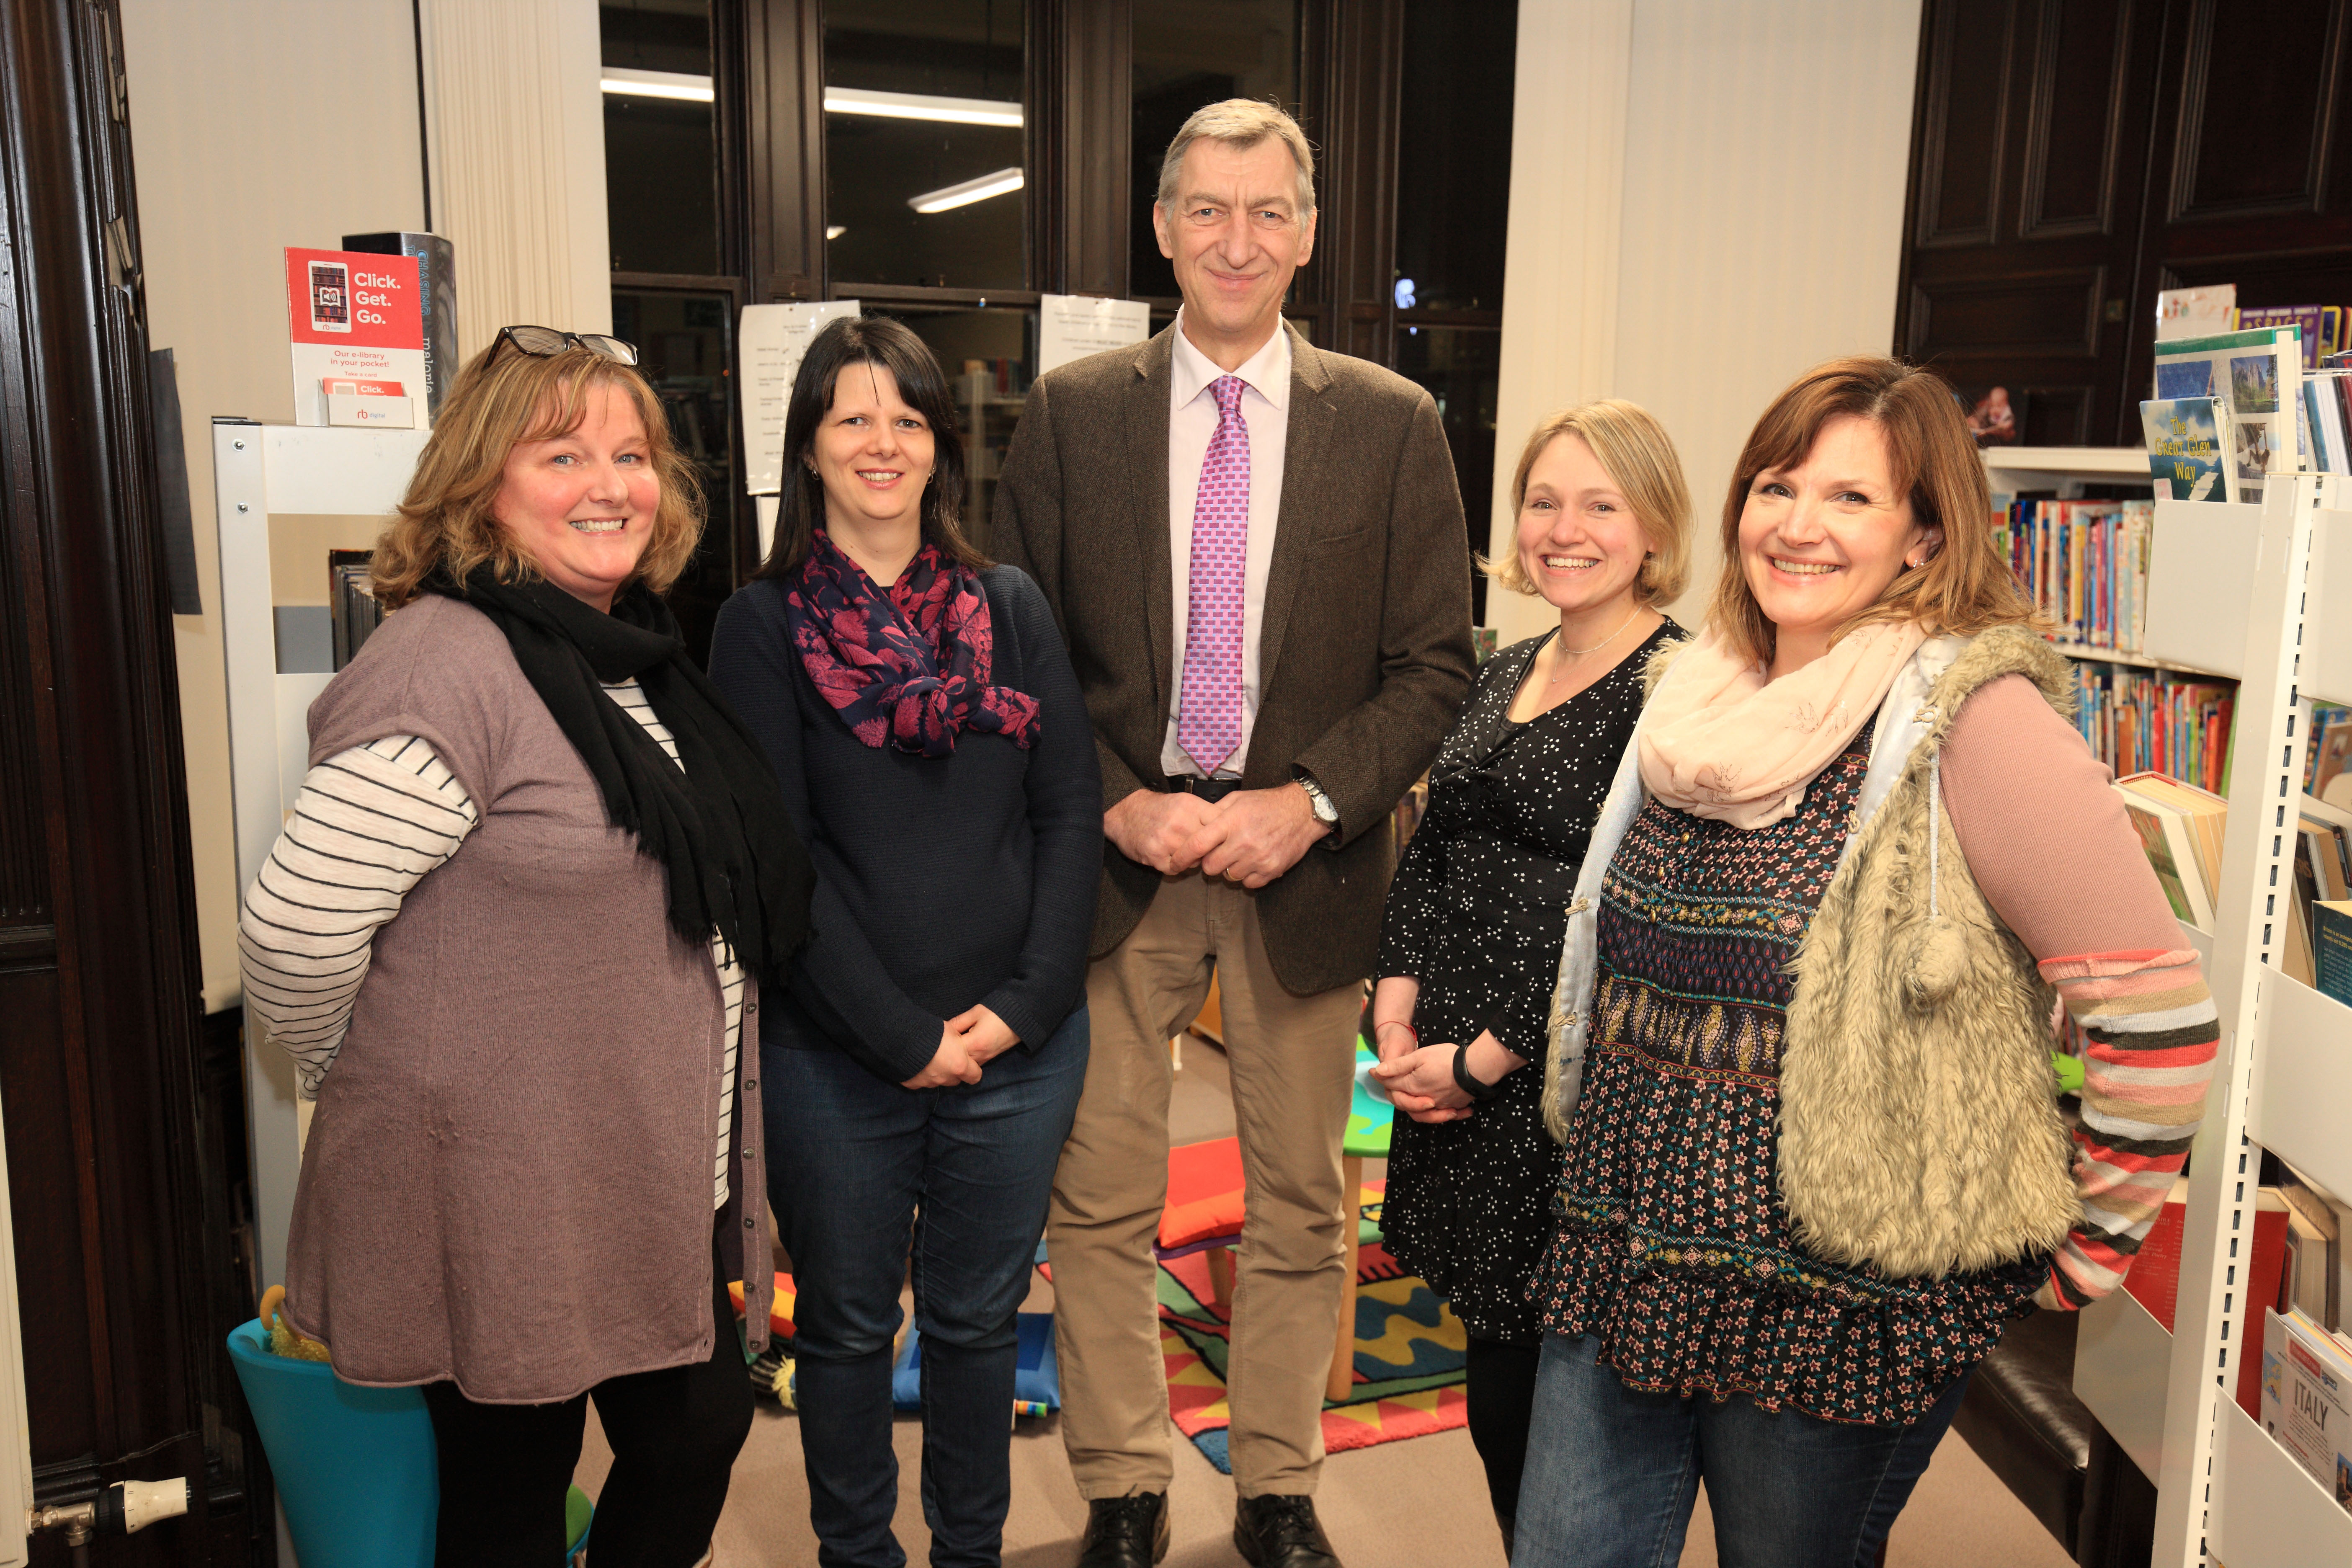 The Den at Heartland Kids Club trustees. From left: Judith Dingwall, Margaret Thain, Councillor Mike Williamson, Caro Middlemass and Ruth Alexander.